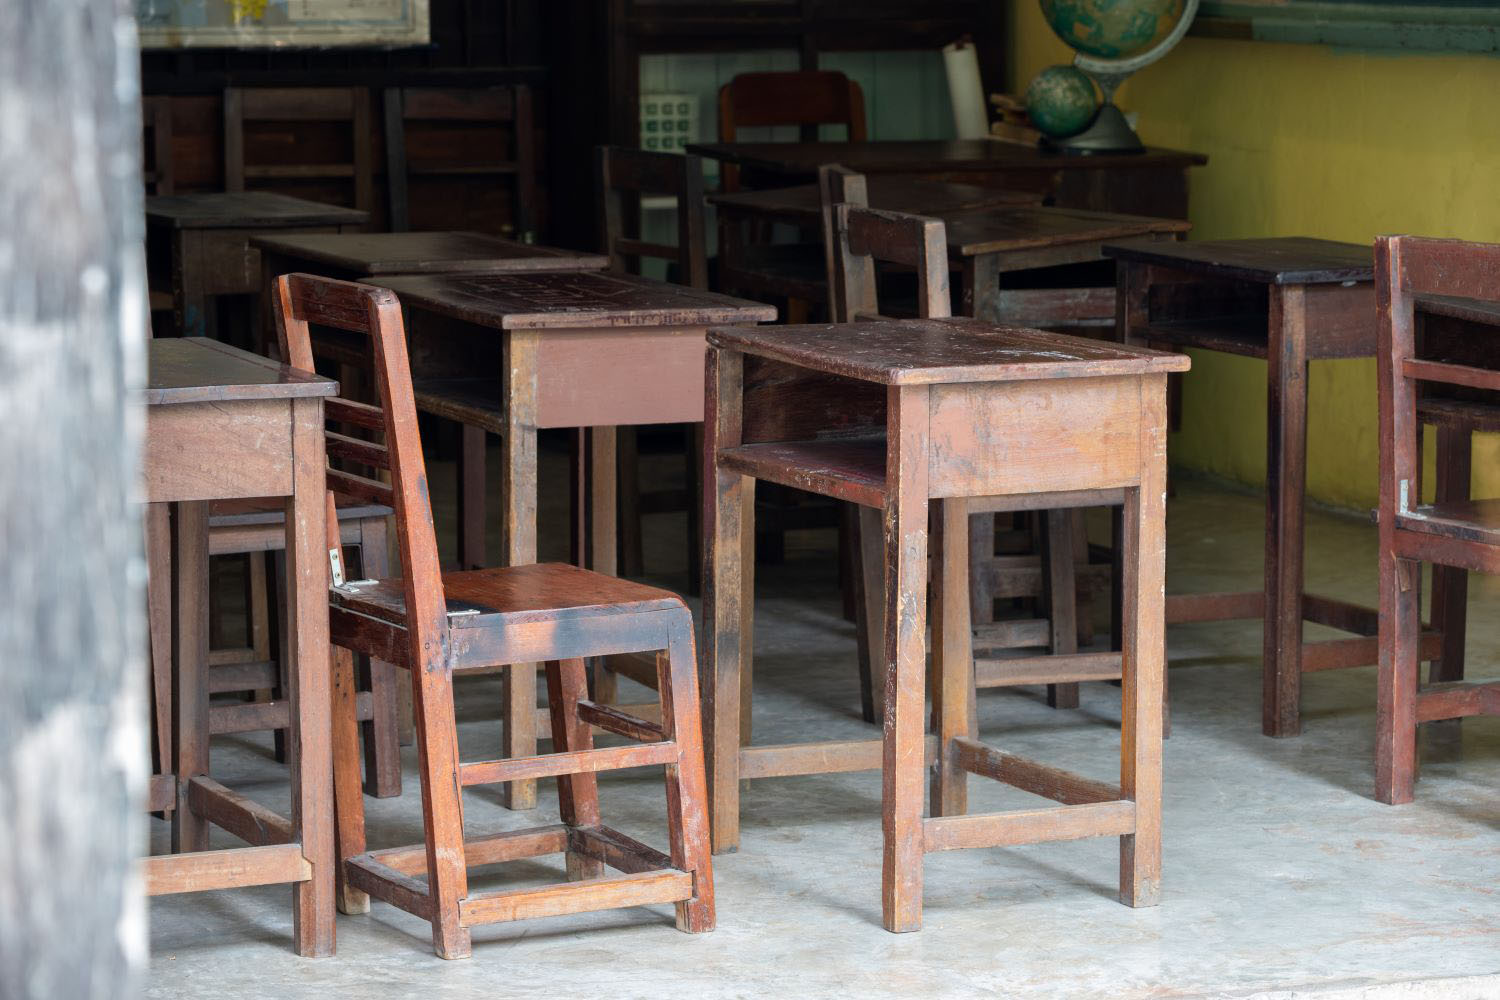 old wooden table in Thai school.